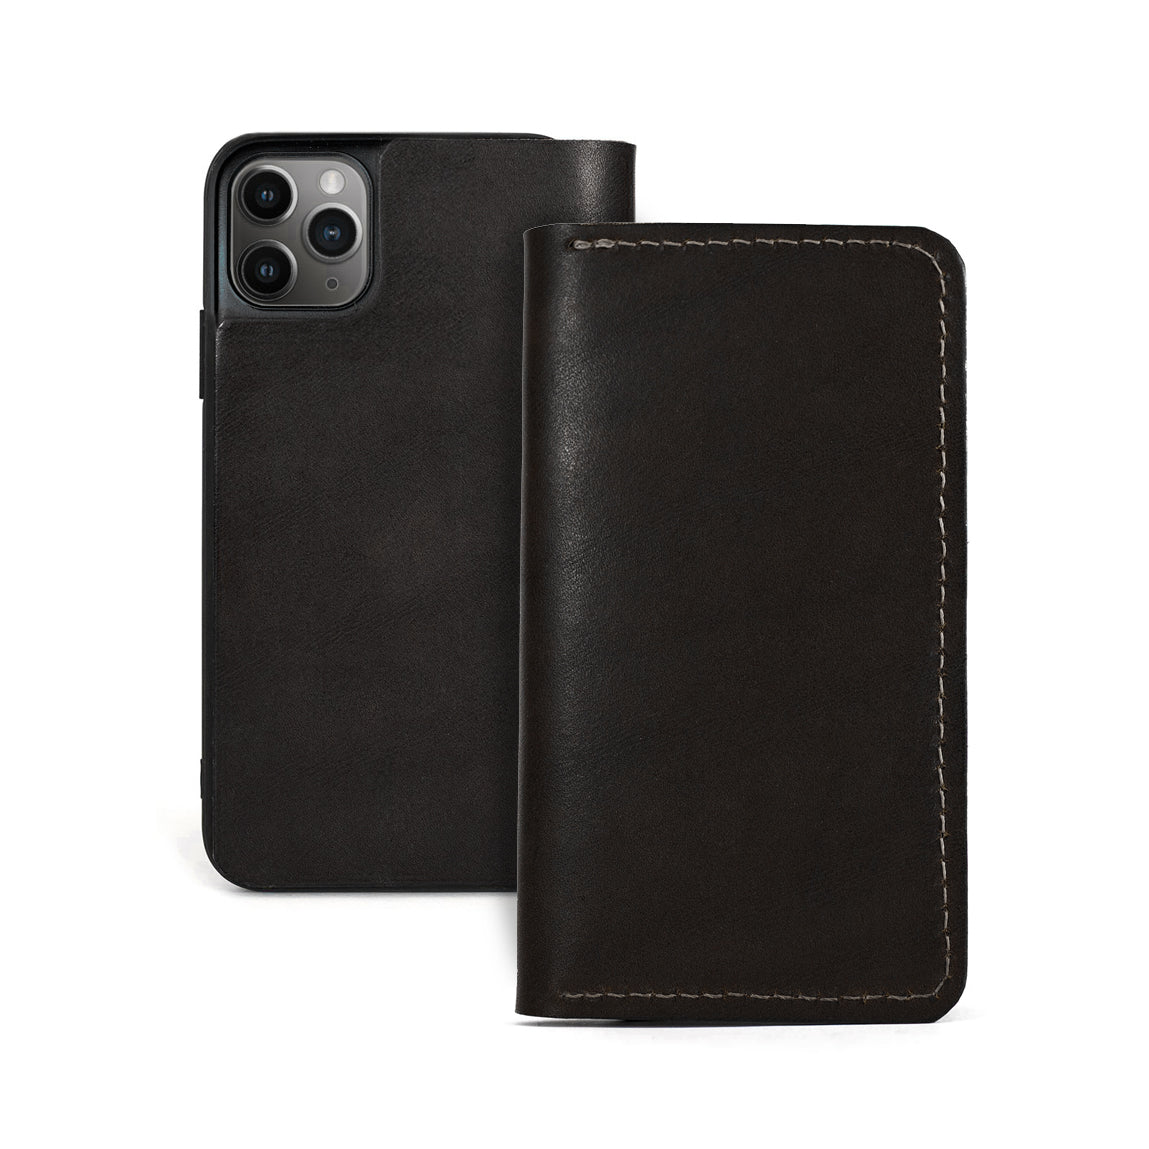 iphone 11pro, iphone 11, pro max, iphone leather case, iphone wallet, new iphone, leather iphone 11pro case, iphone xr, iphone xs max, iphone x